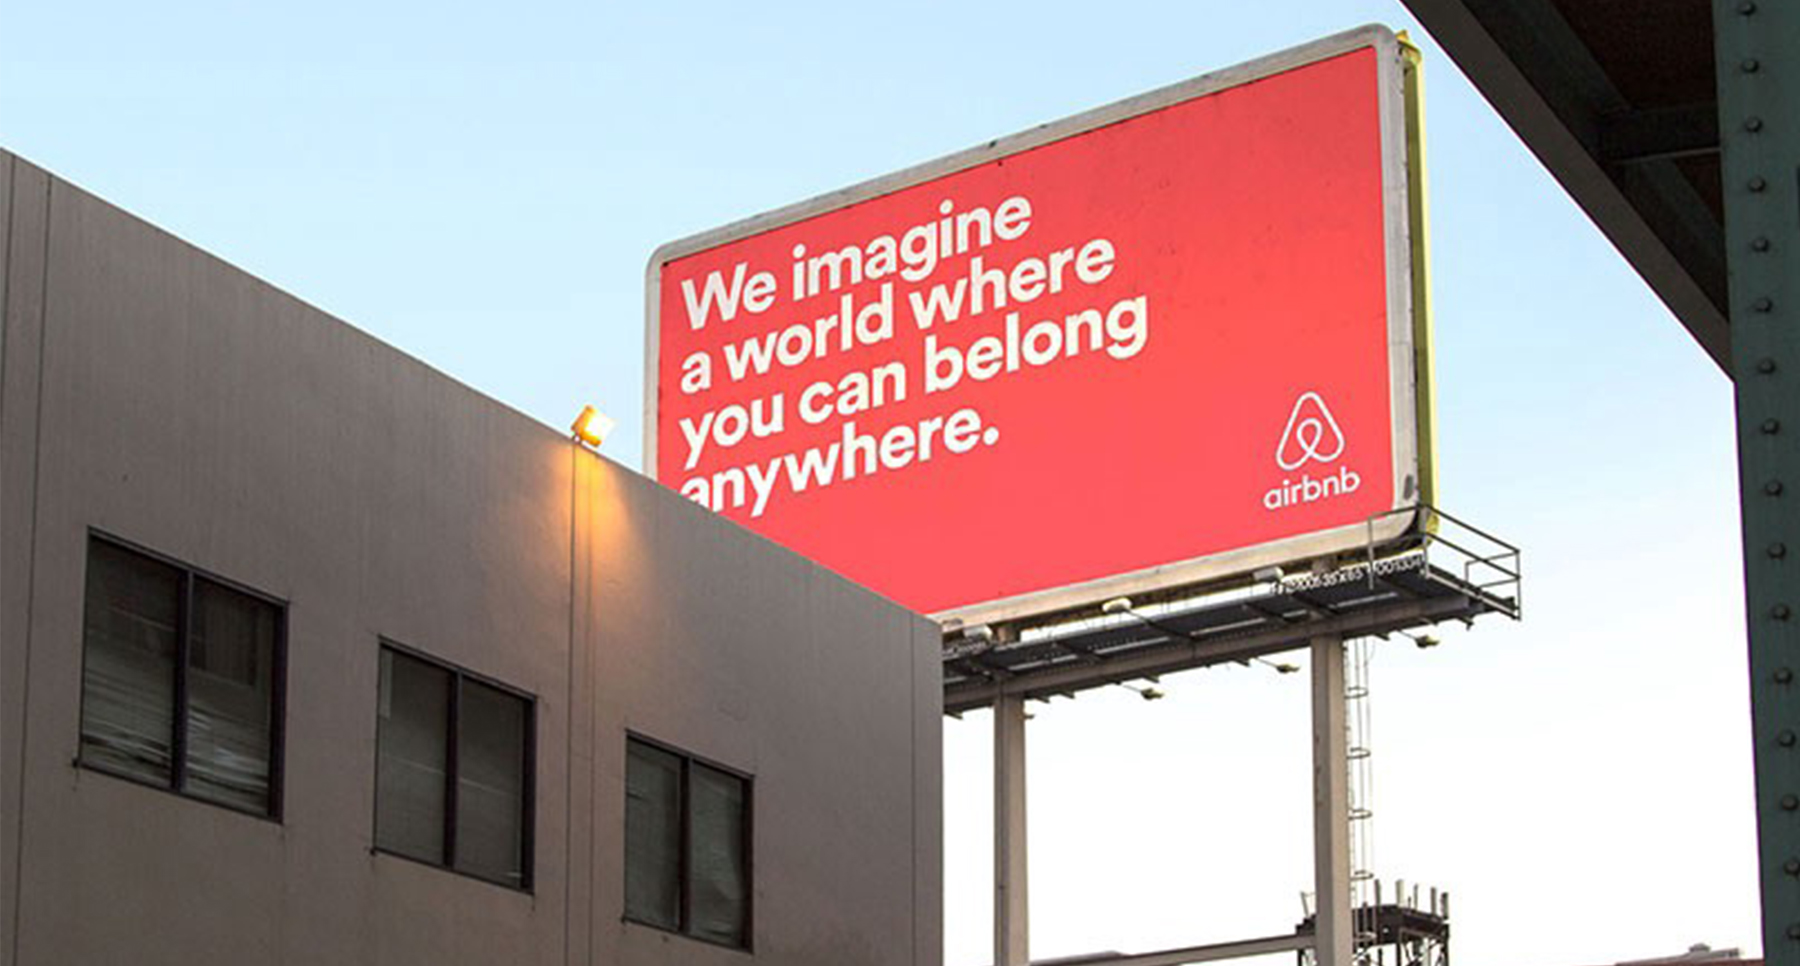 Airbnb spent 500m on an Olympic sponsorship did it work?